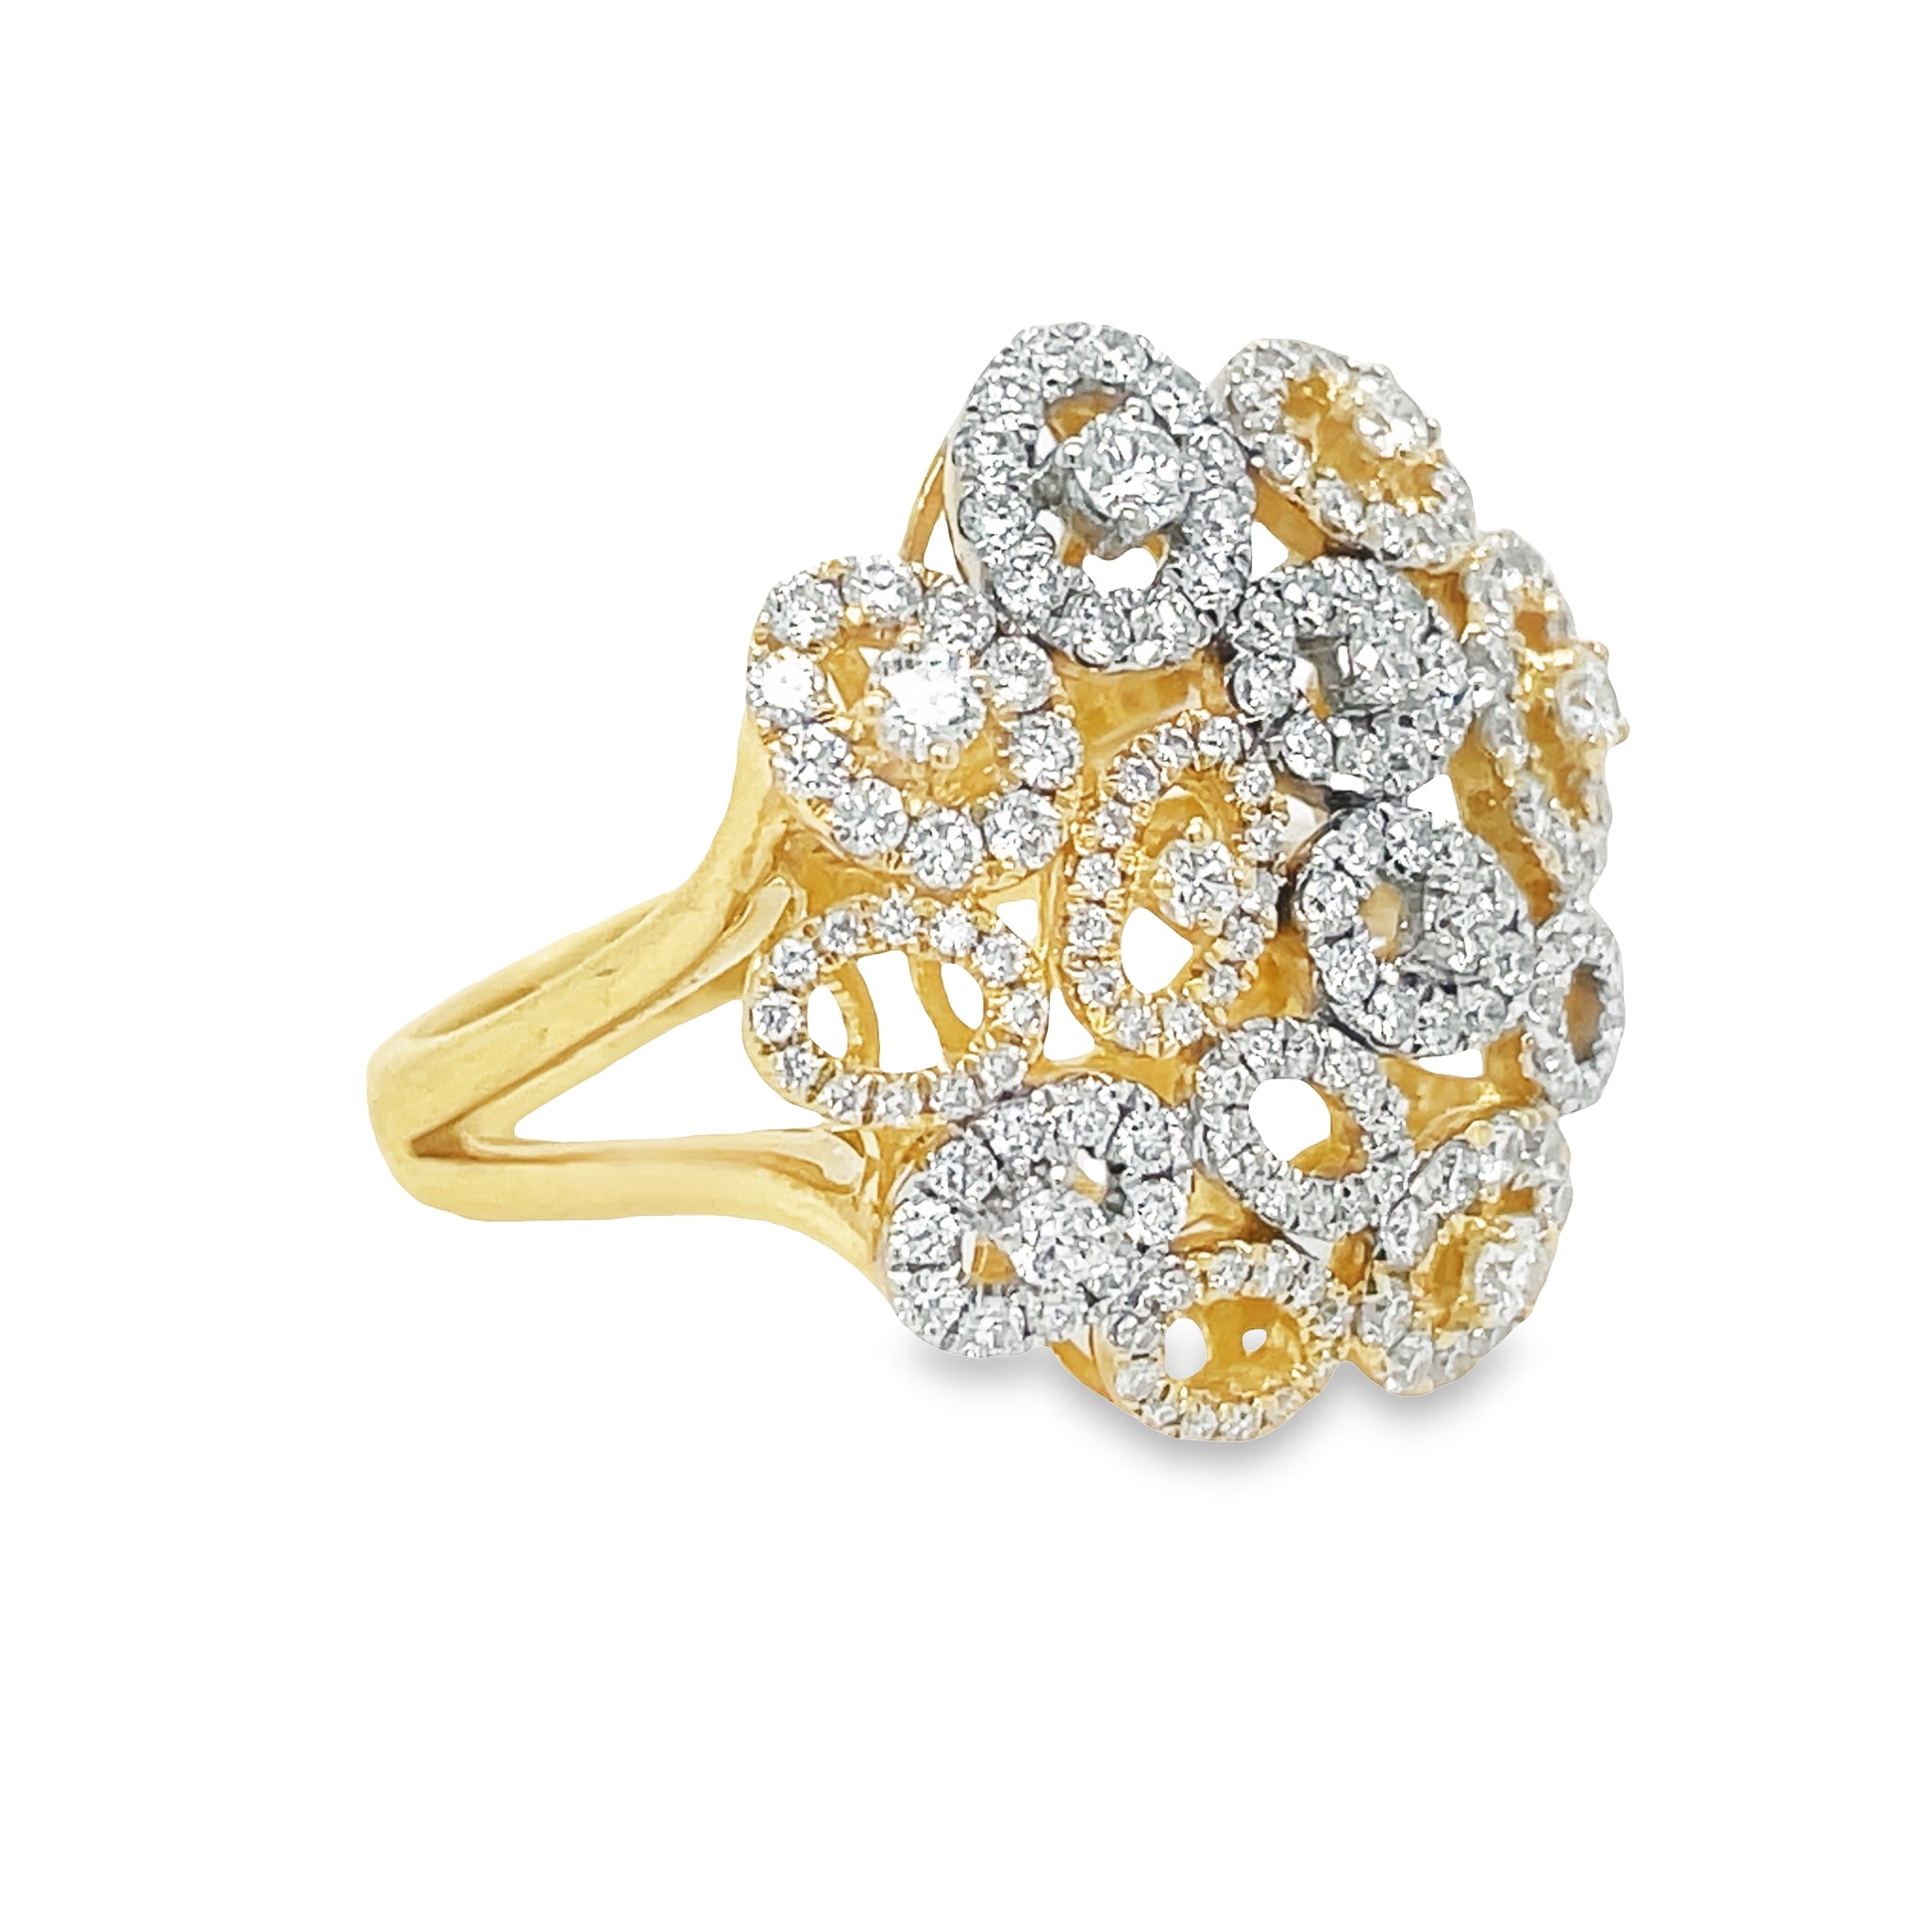 This modern fashion ring is crafted from 14K two tone gold and is adorned with a total of 1.31 round diamonds, arranged in a fancy cluster oval shape. The elegant design of this ring will add a striking and timeless finishing touch to any outfit.